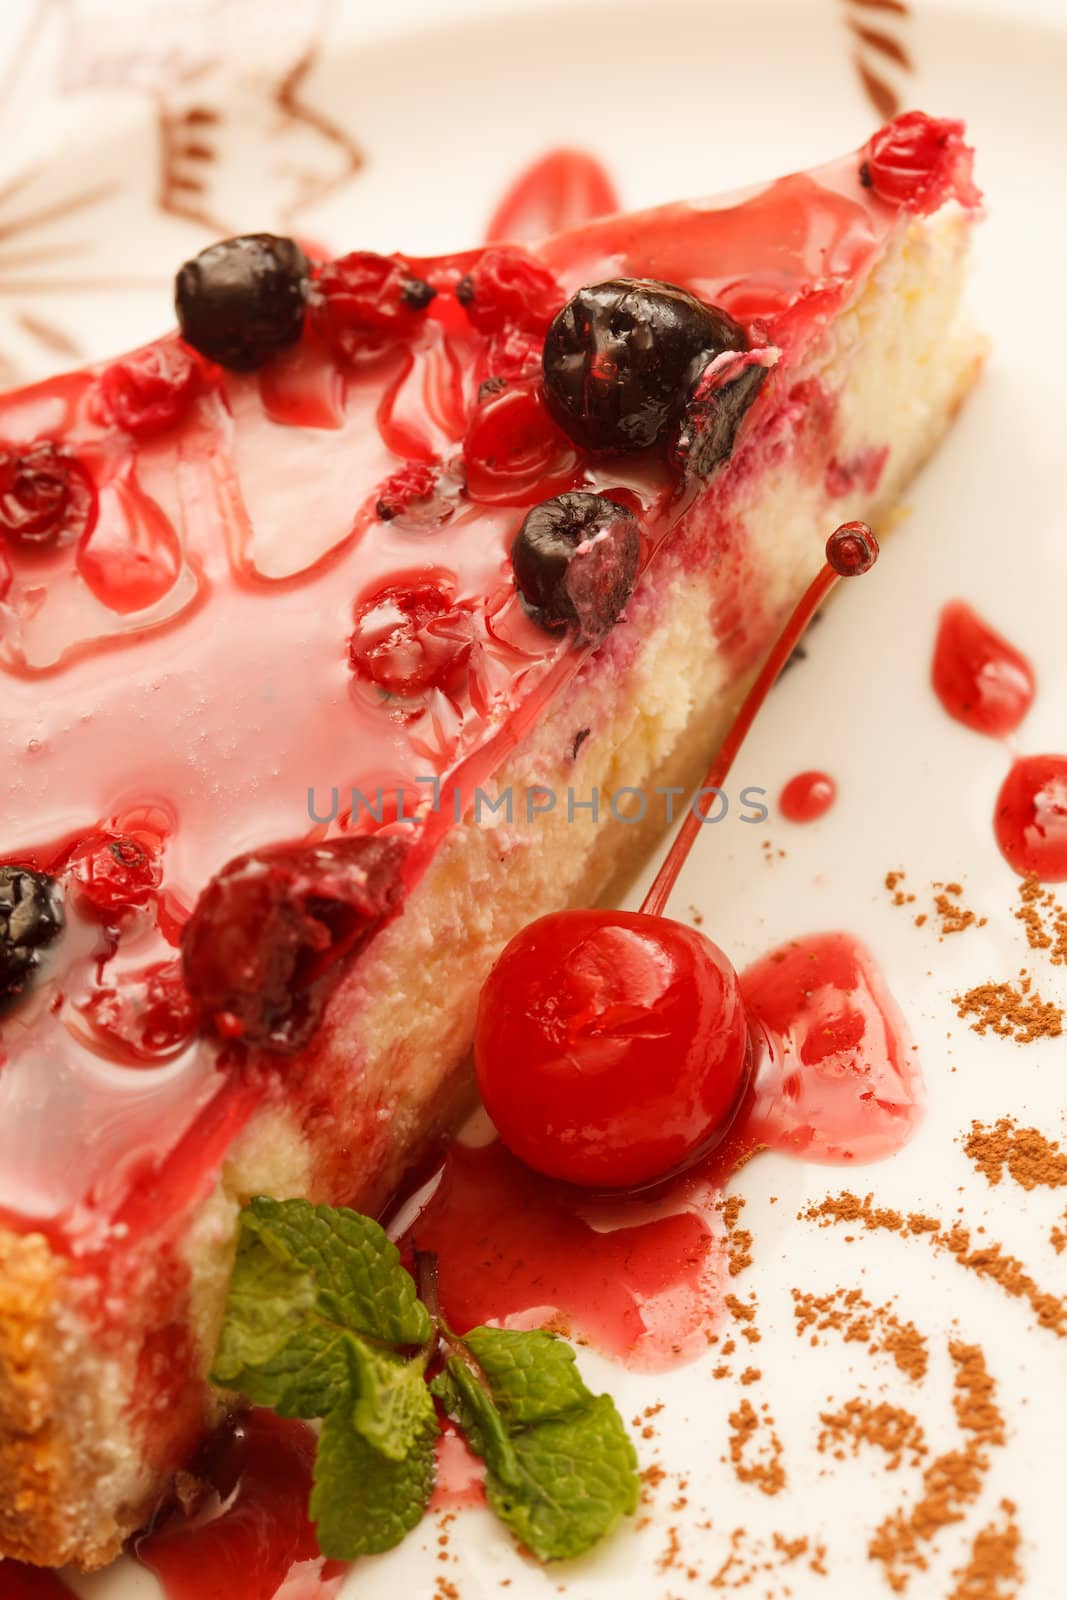 cheesecake with berries by shebeko